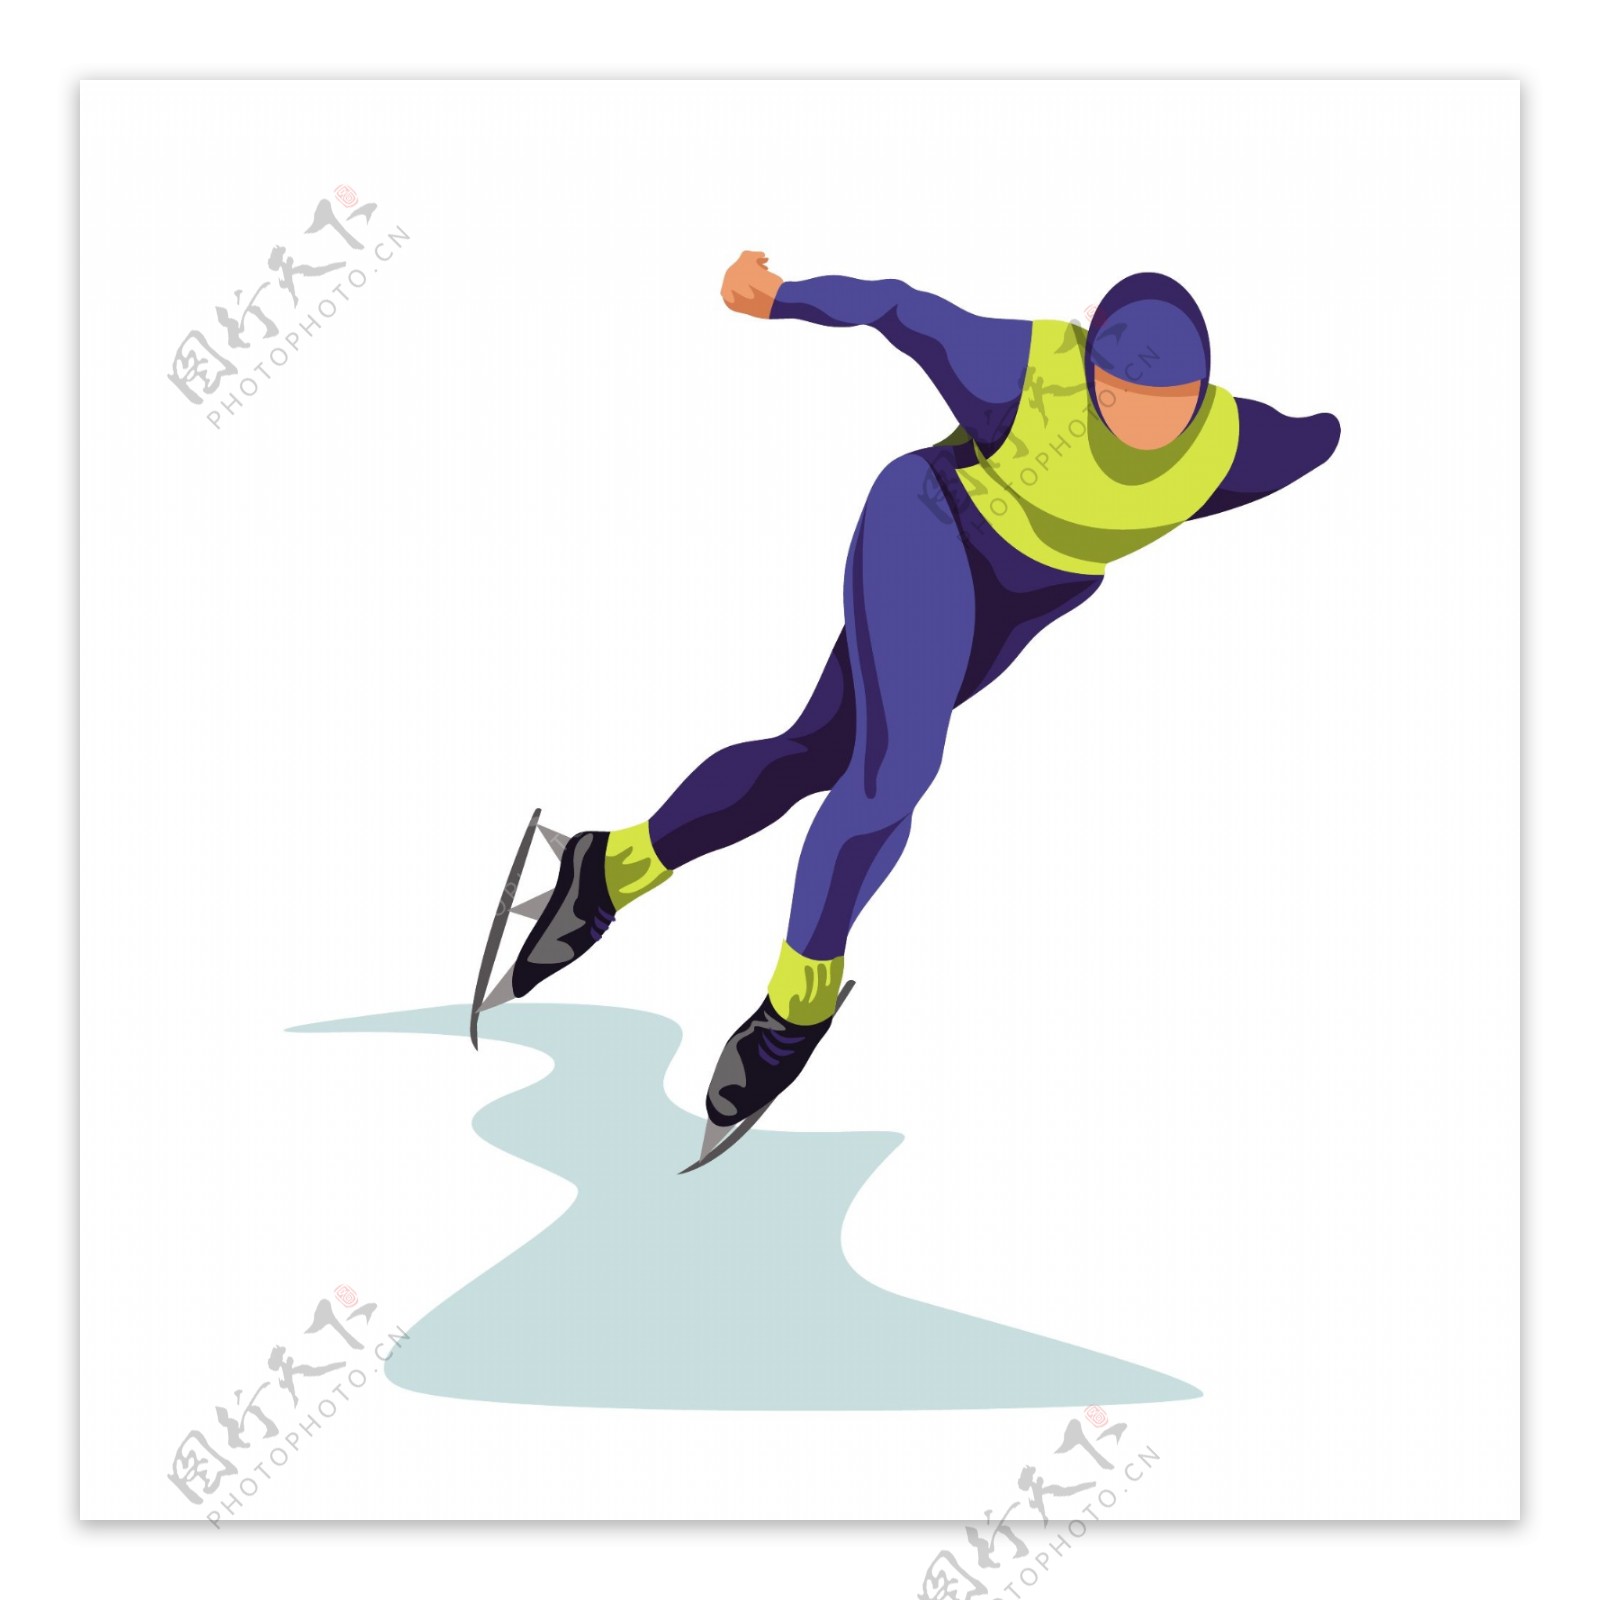 A Vector Illustration Of People Ice Skating In An Outdoor Ice Skating ...